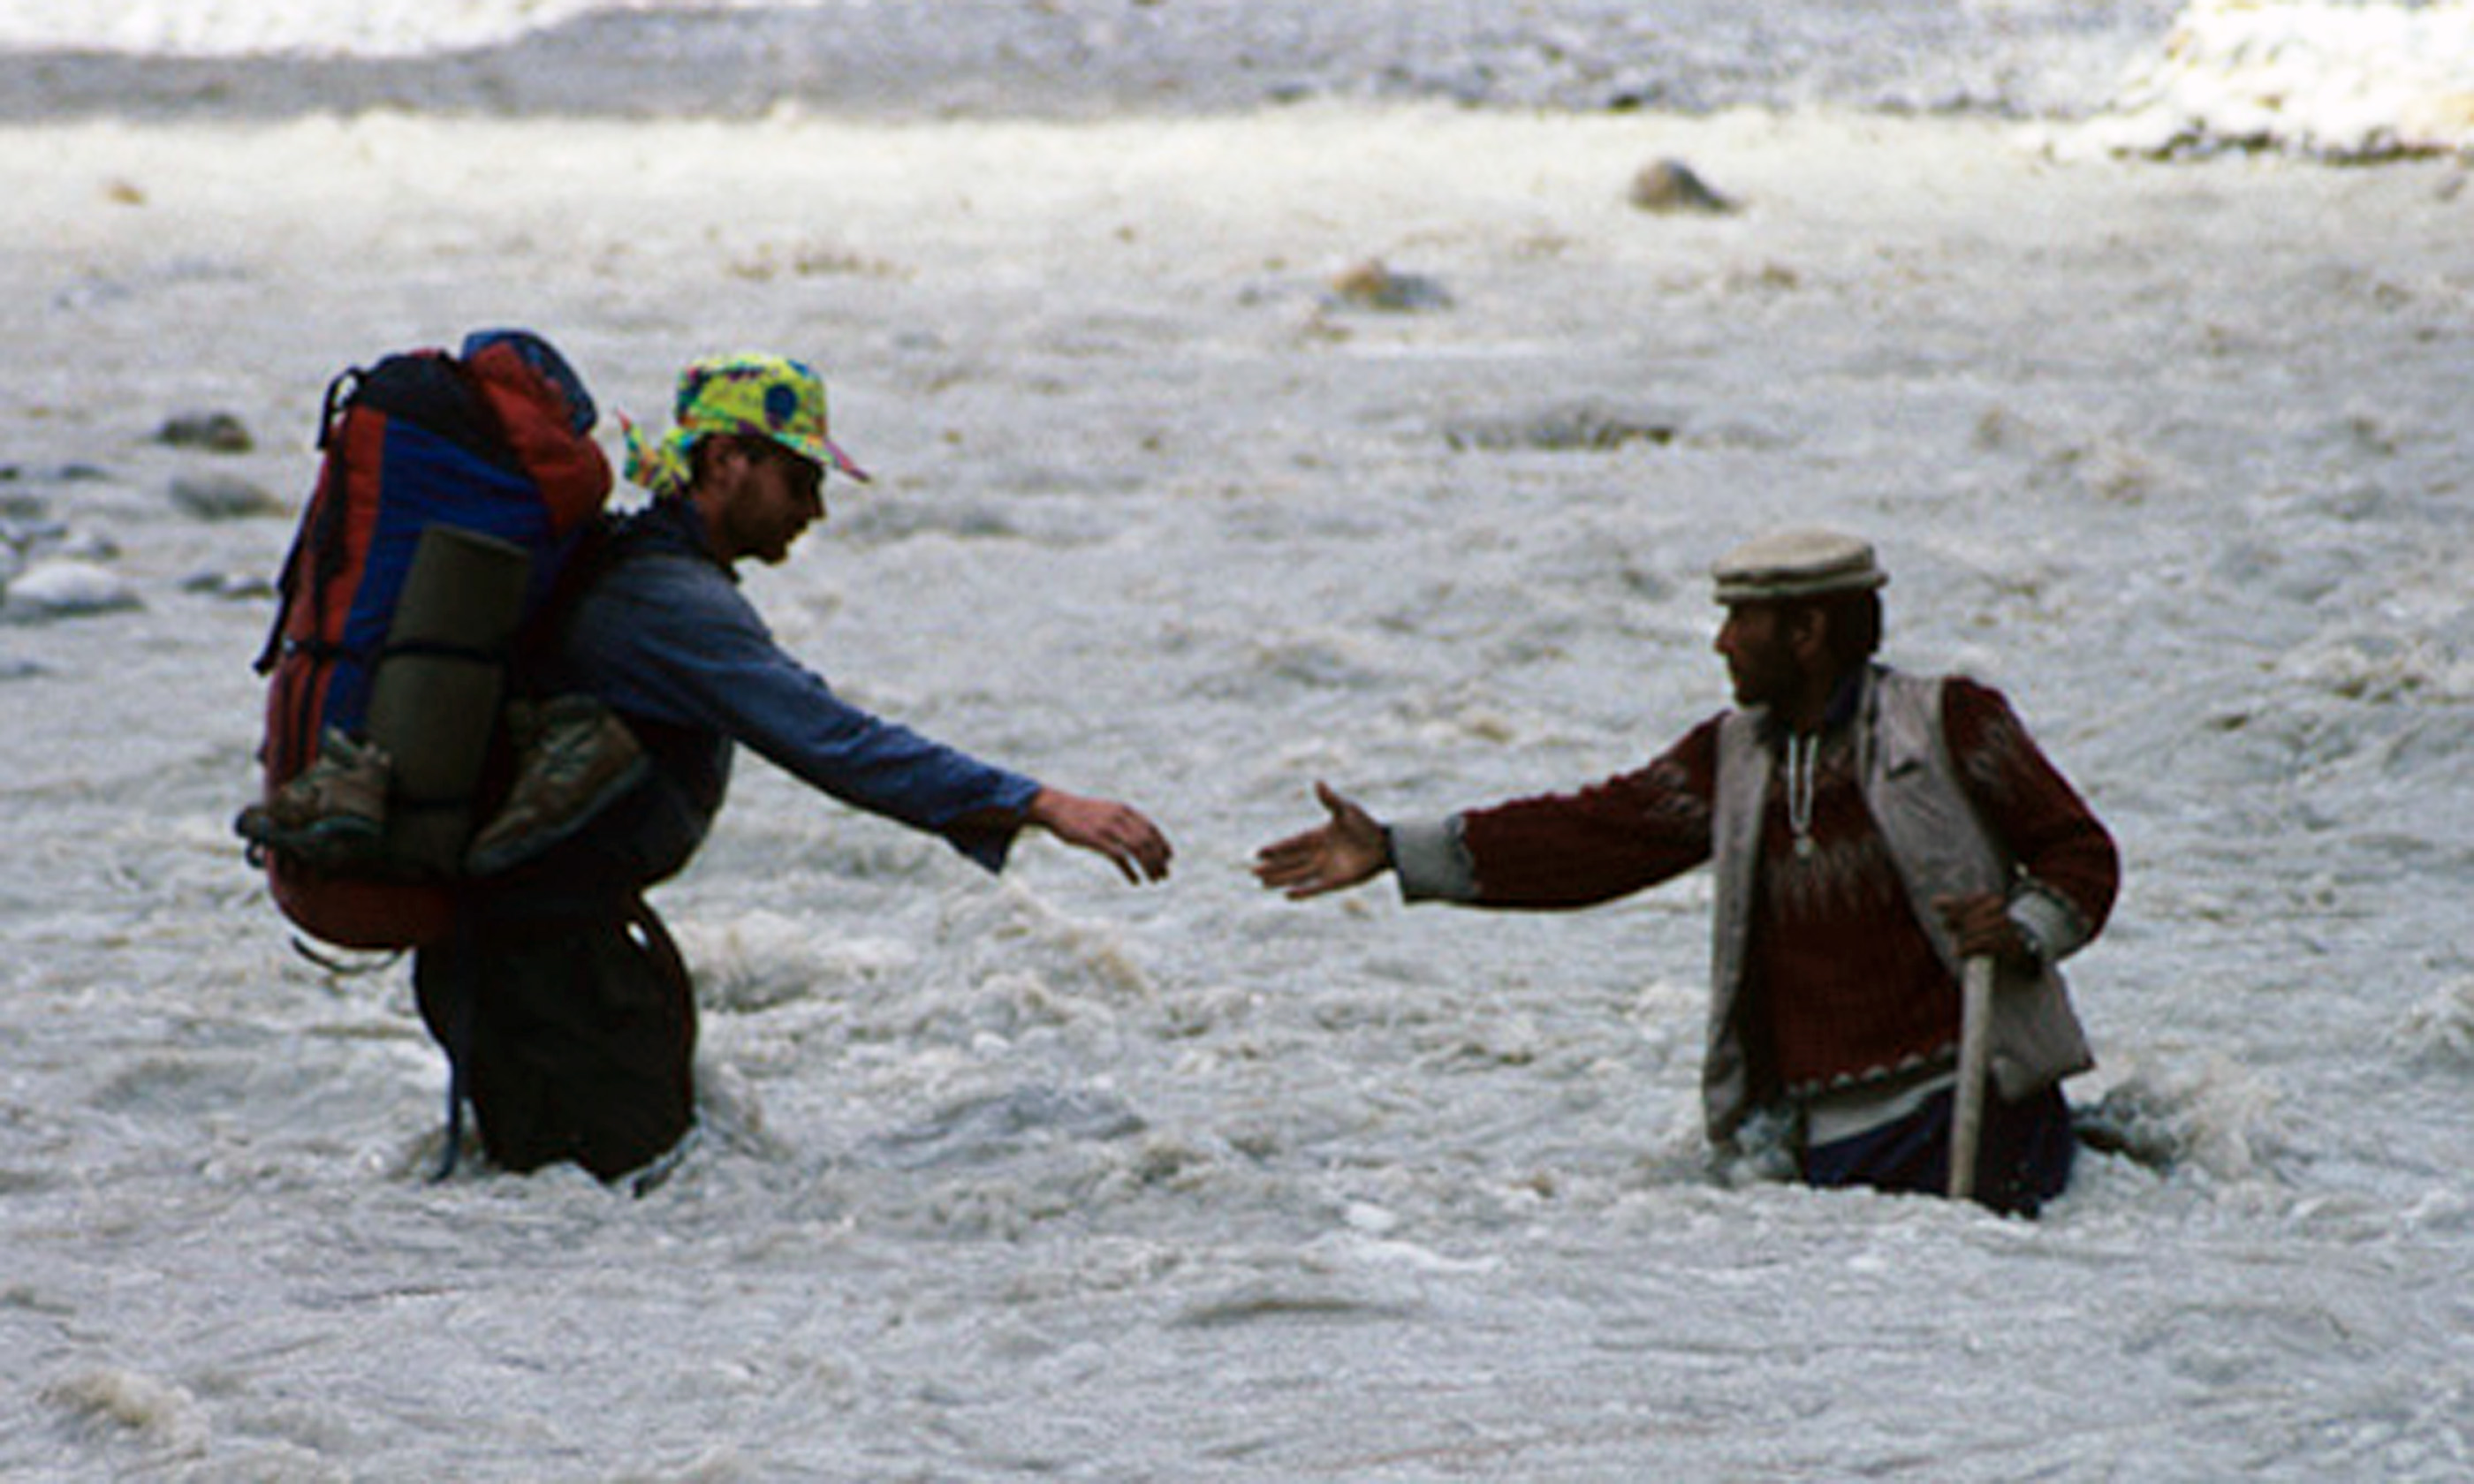 Andy Cave helped across river by a porter (Andy Perkins)